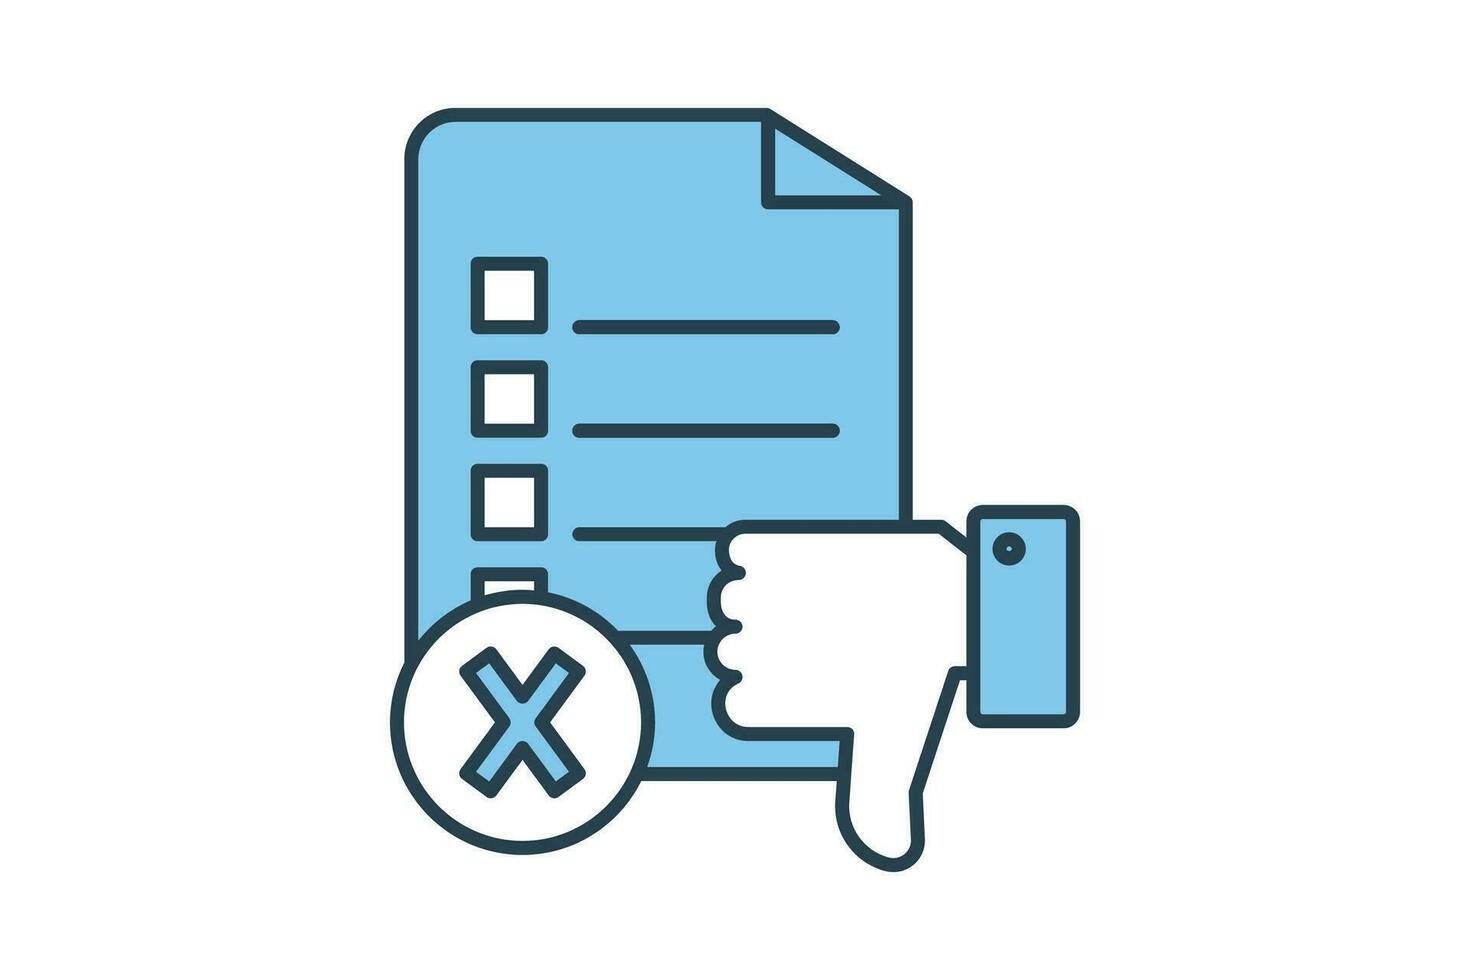 Disapproval Icon. Icon related to survey. flat line icon style. Simple vector design editable